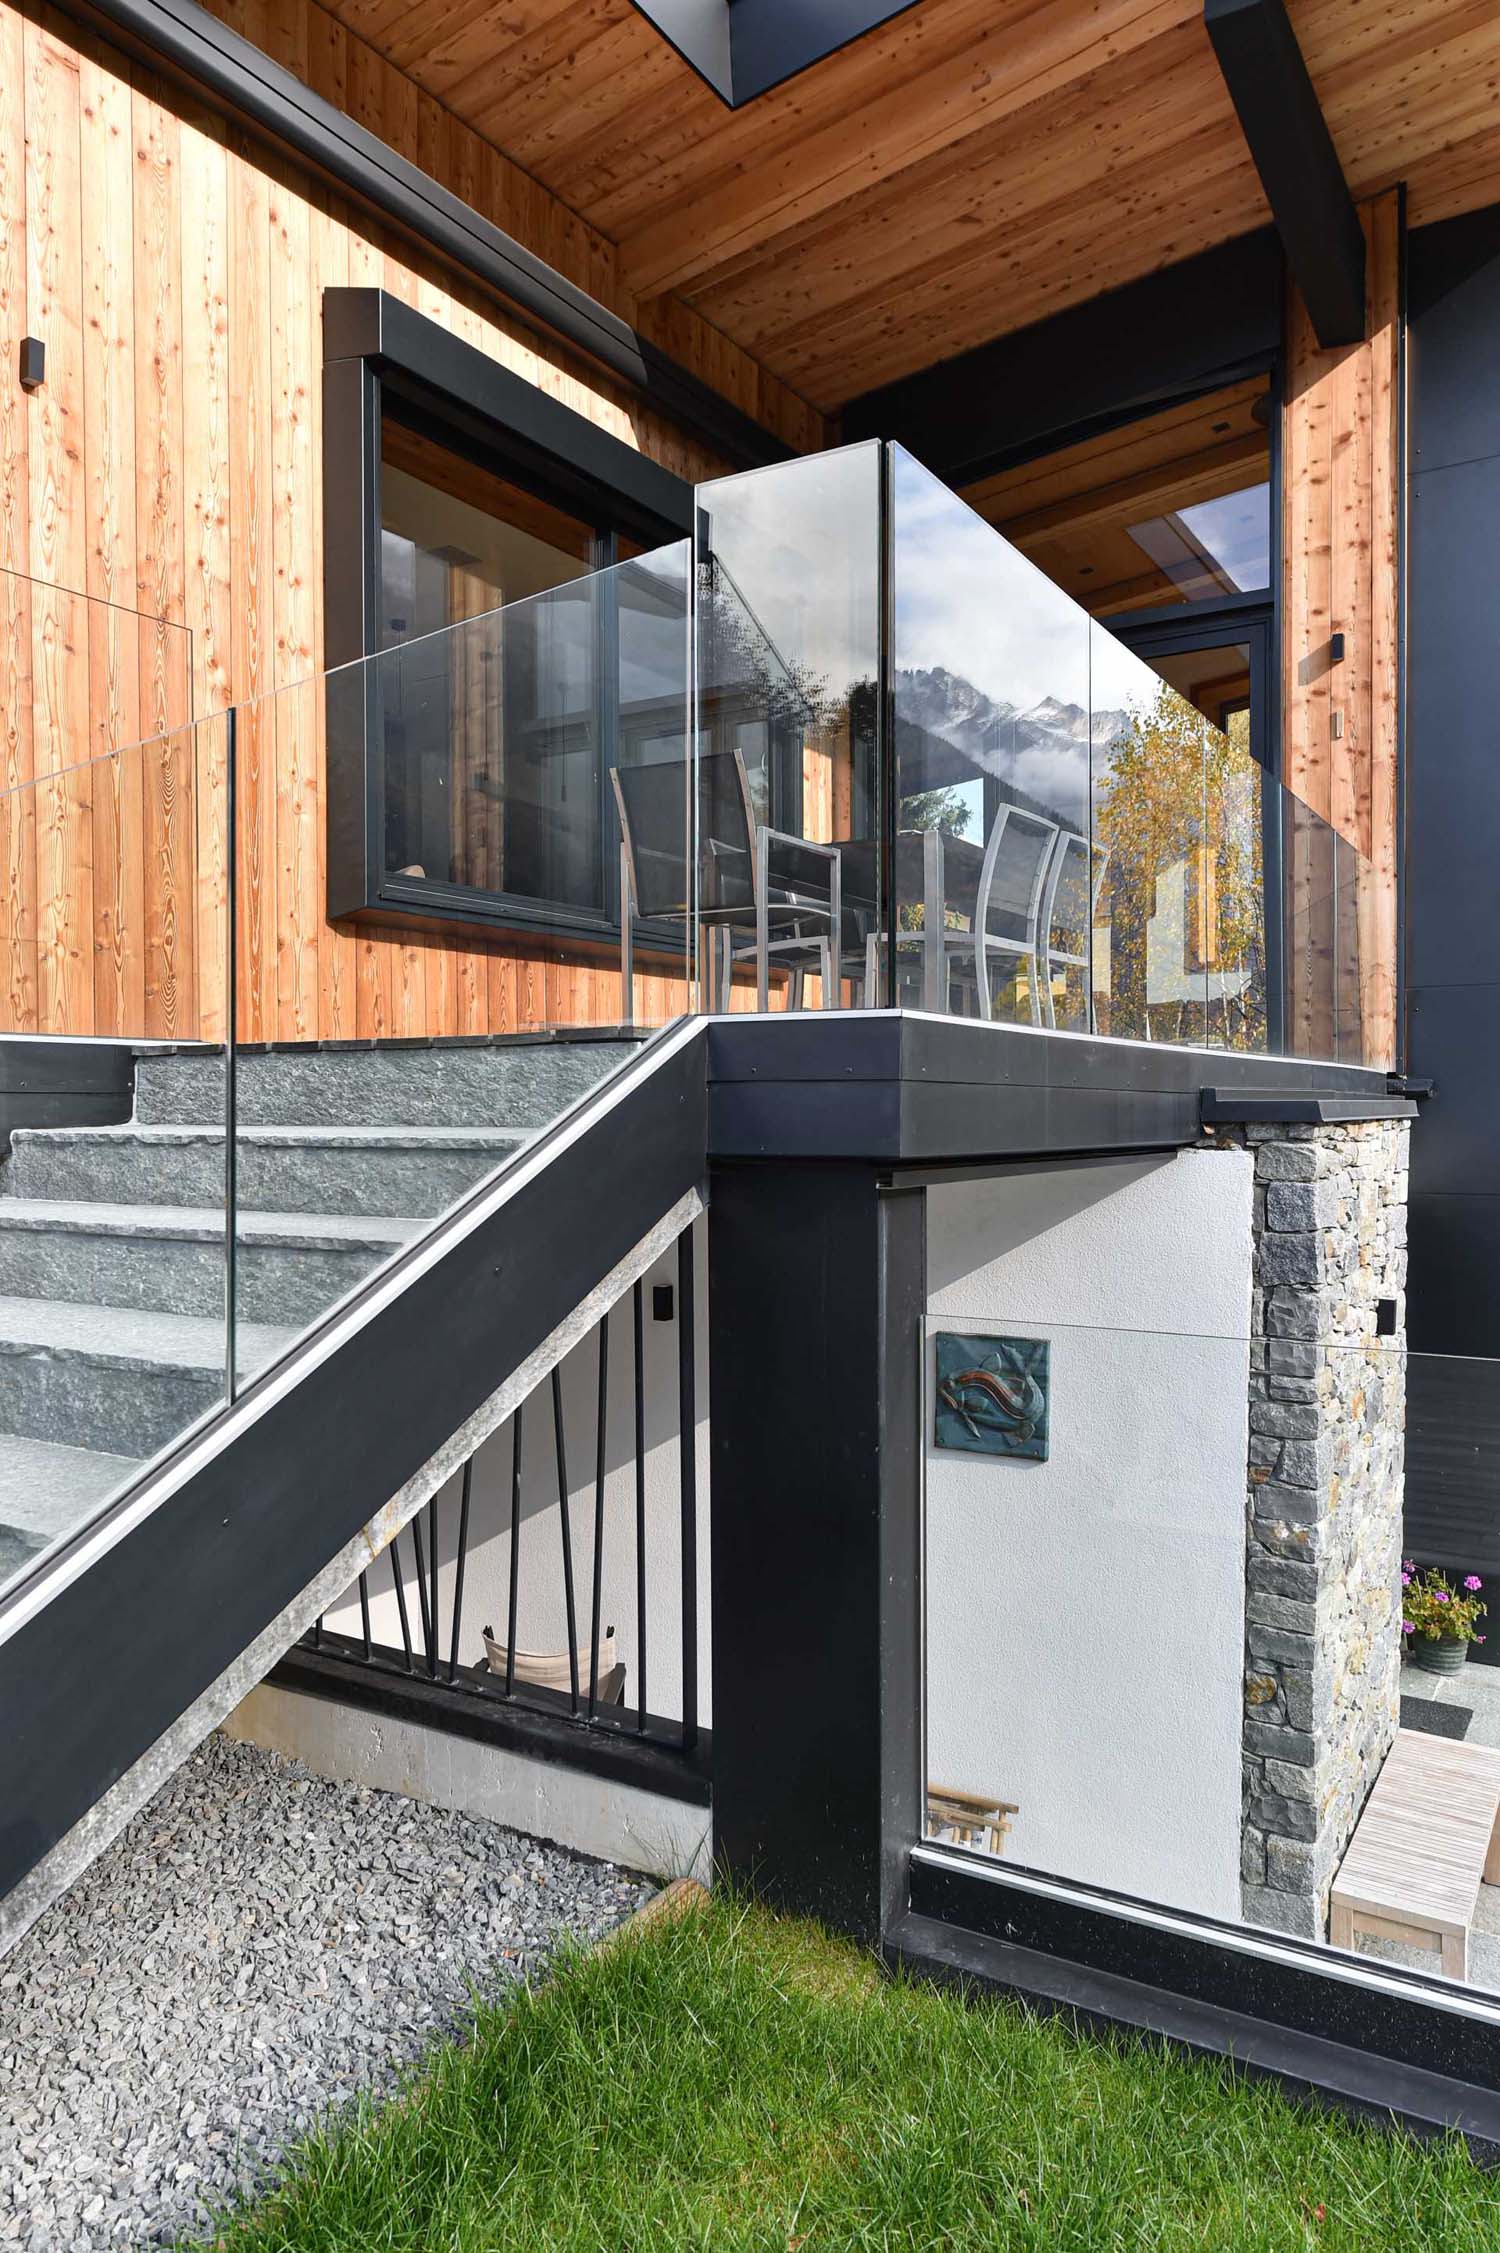 A modern home with wood siding, black accents, and glass railings.